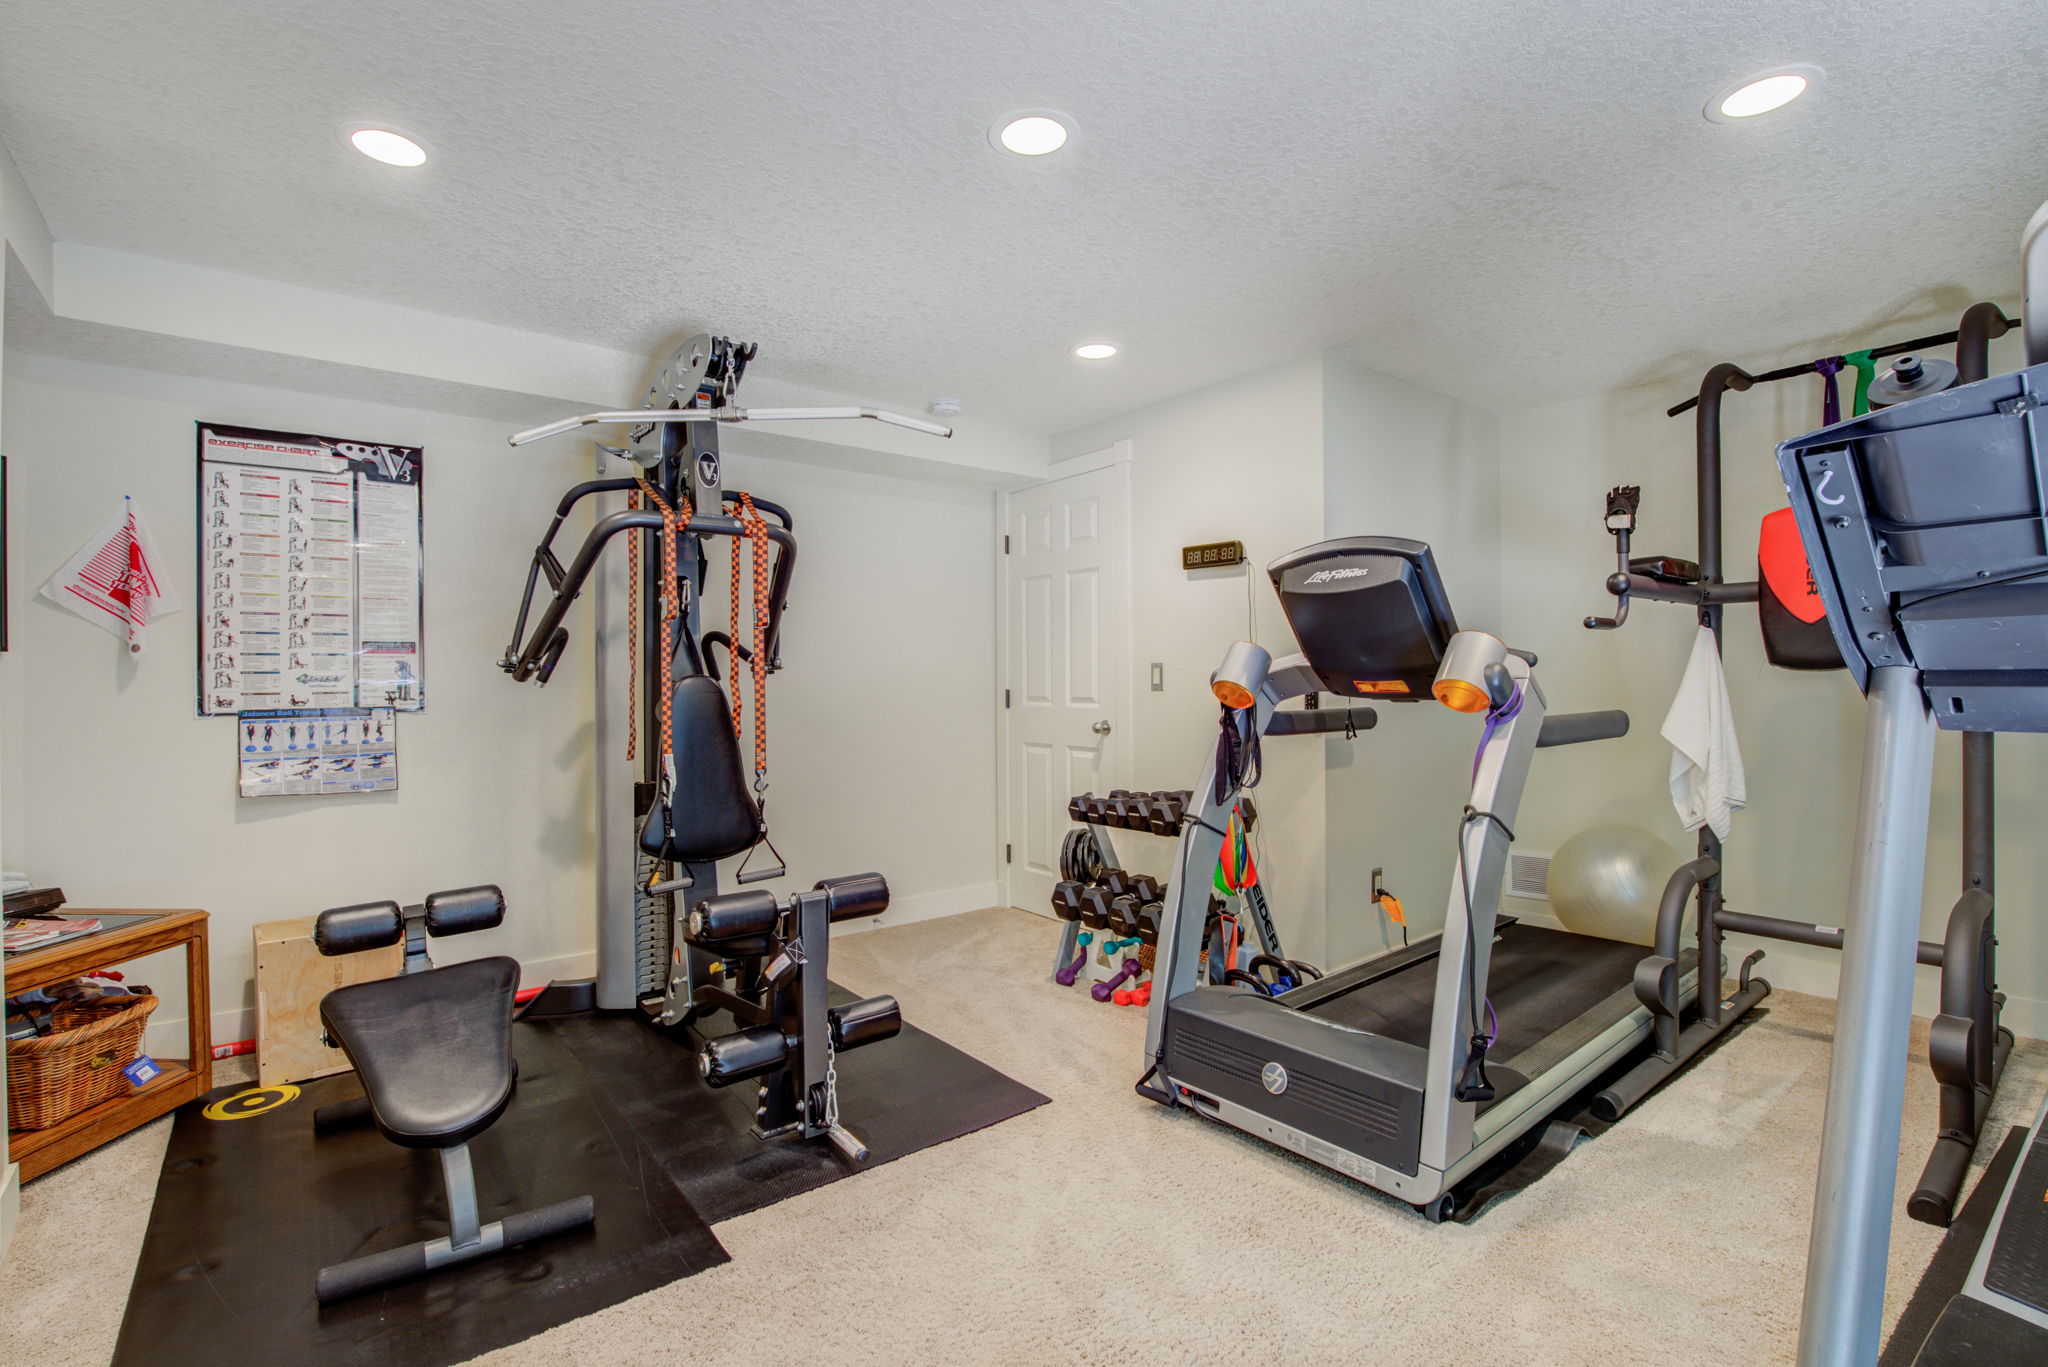 Bedroom 3 used as Gym